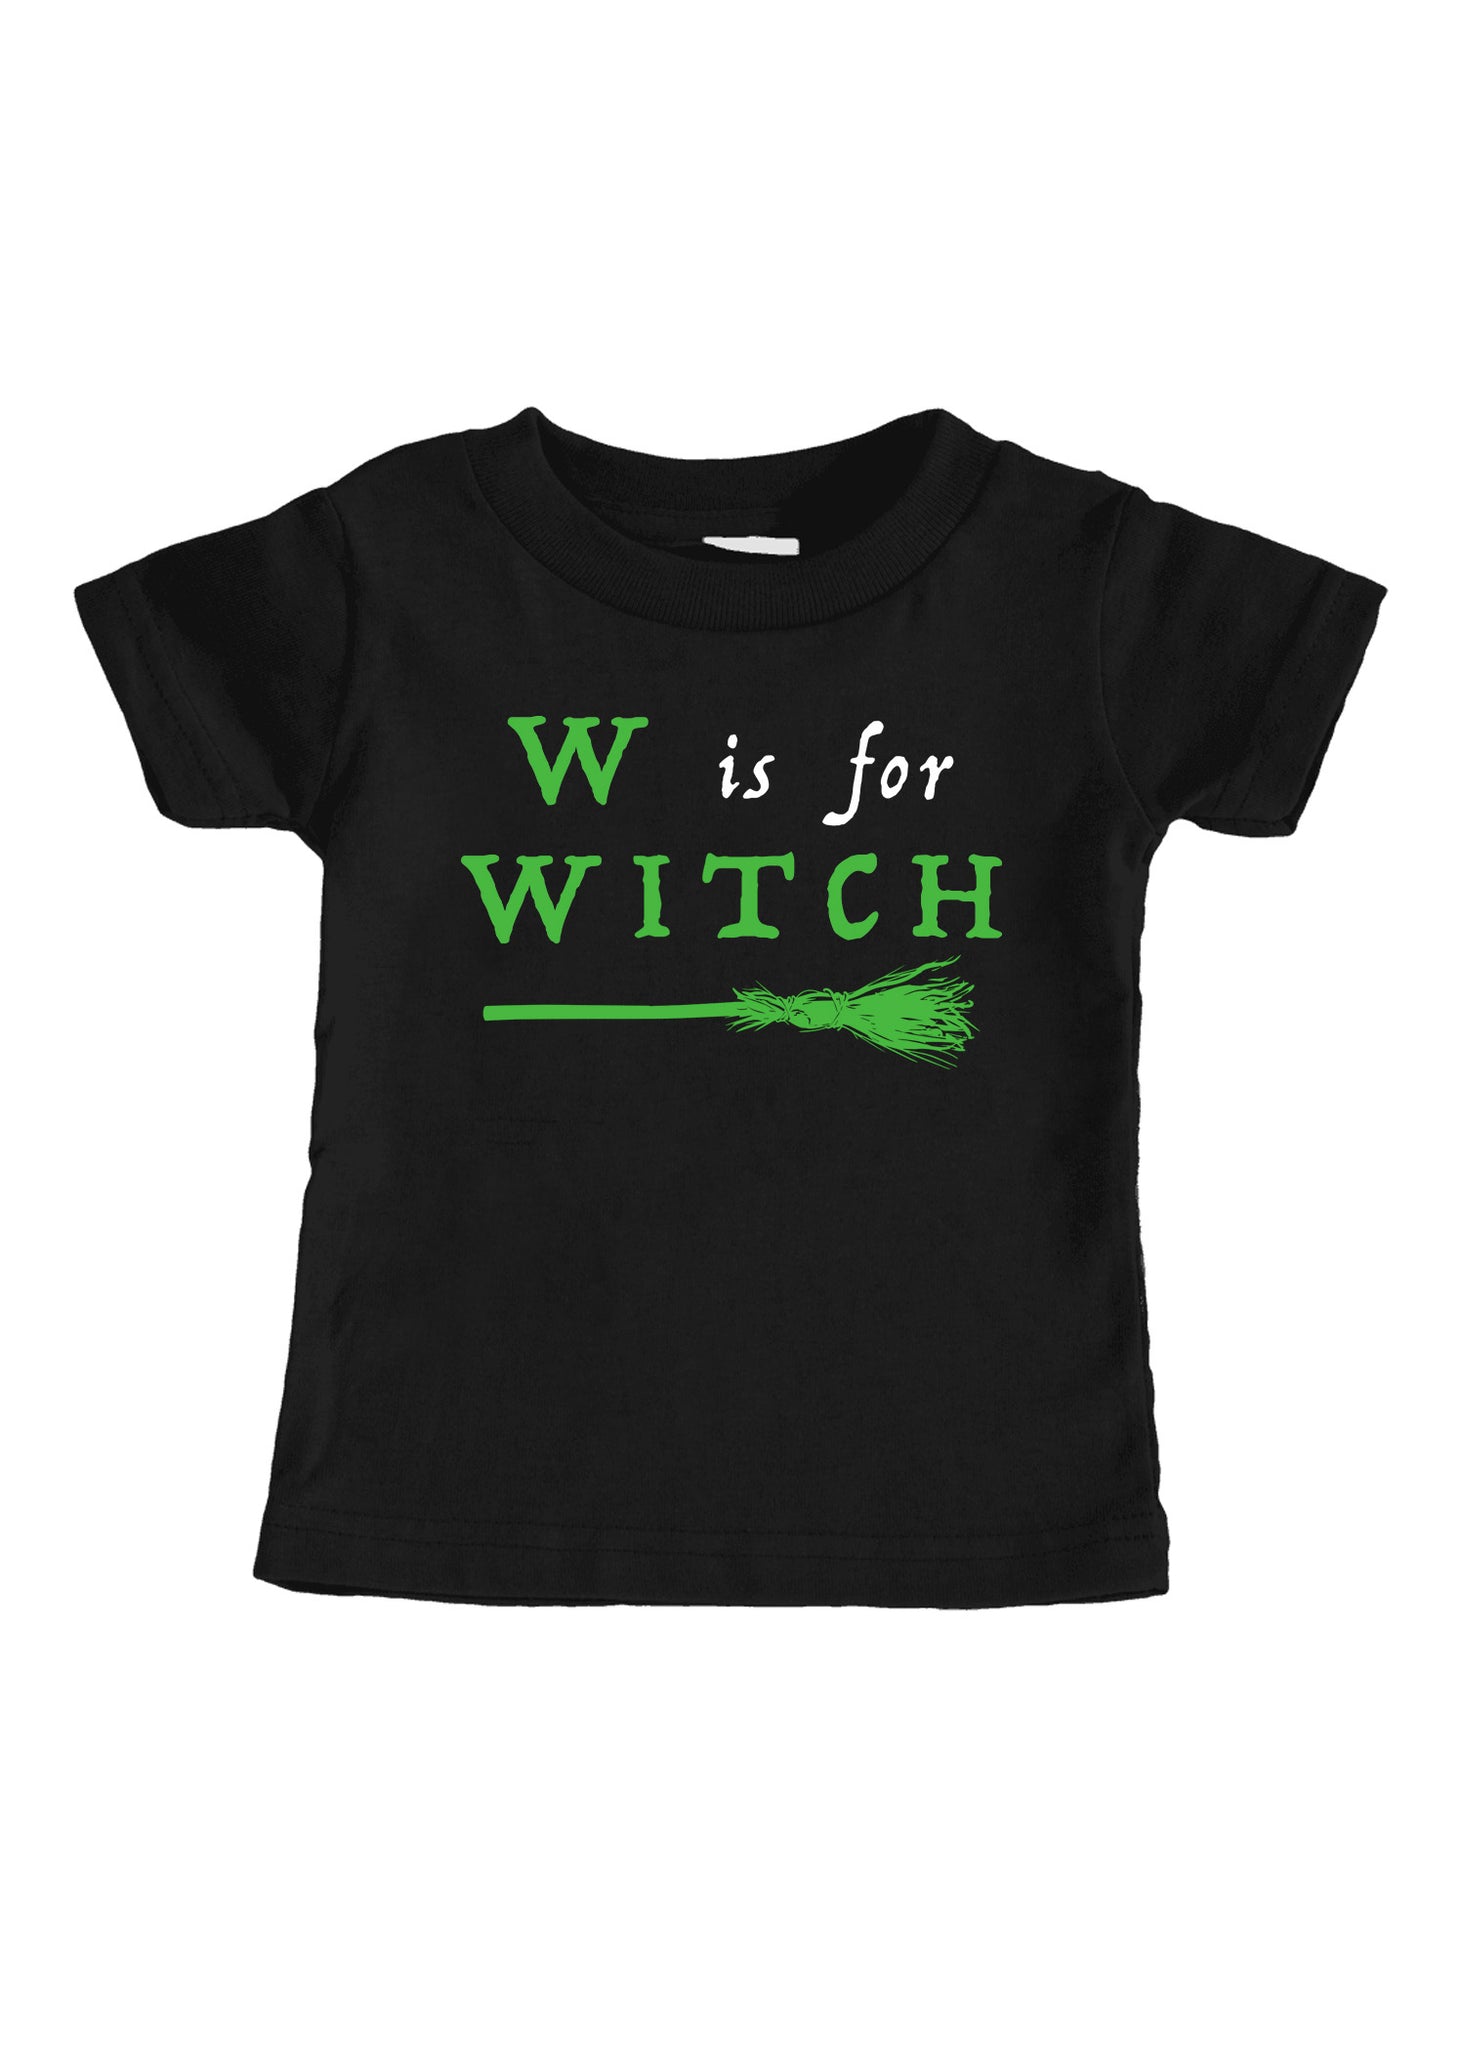 Baby "W is for Witch" ABCs T-Shirt